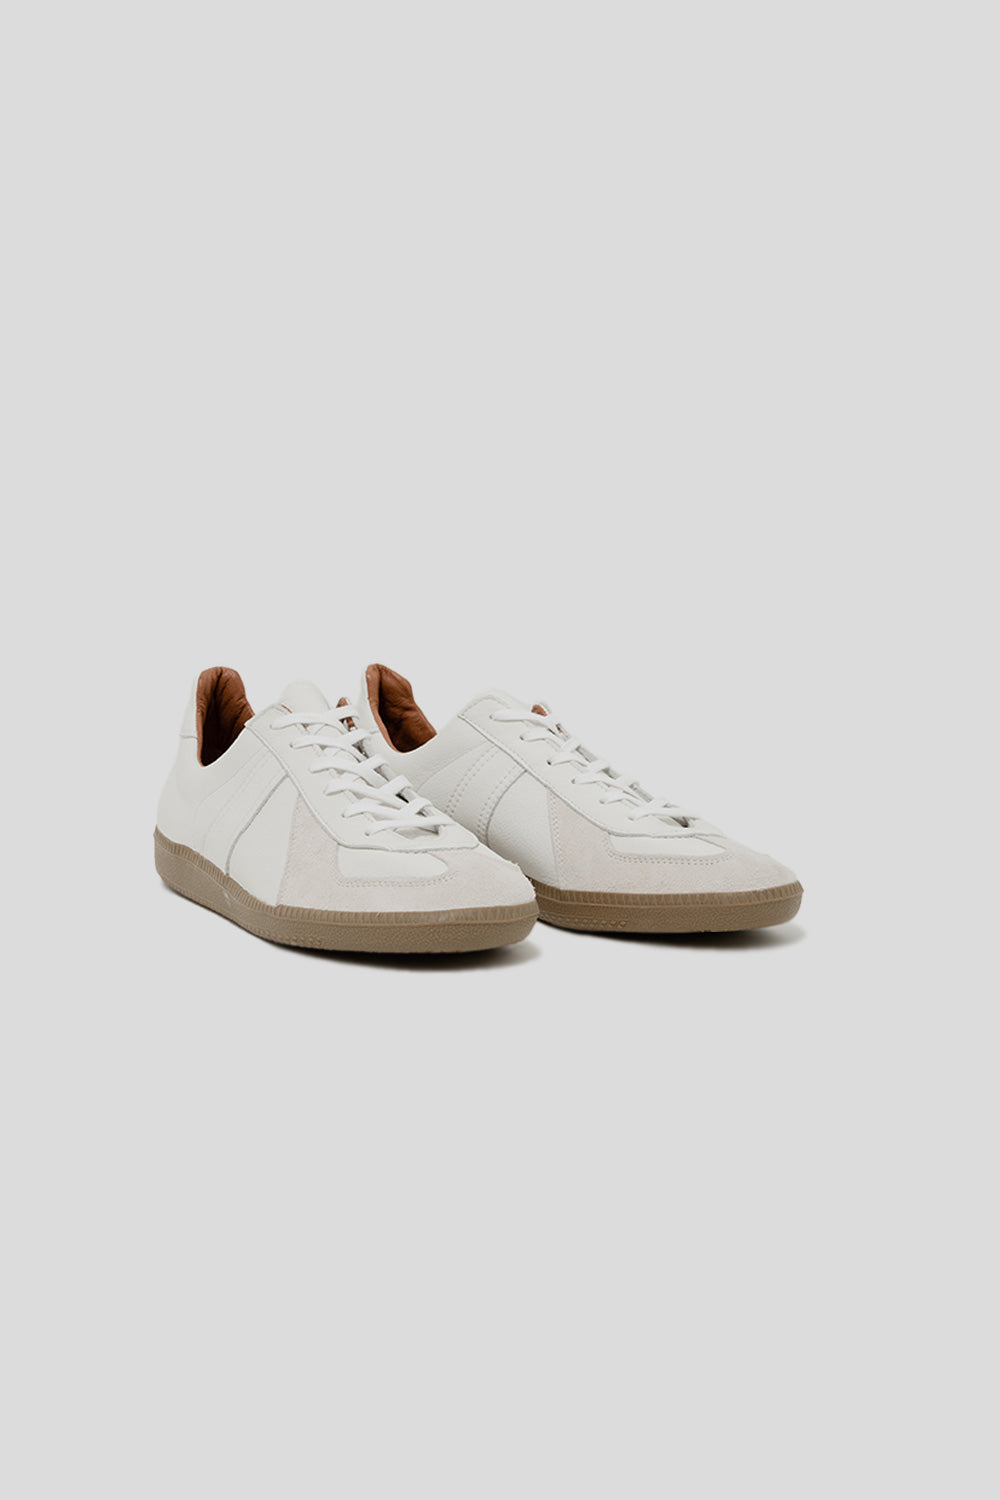 Reproduction of Found German Military Trainer in White | Wallace Merca ...